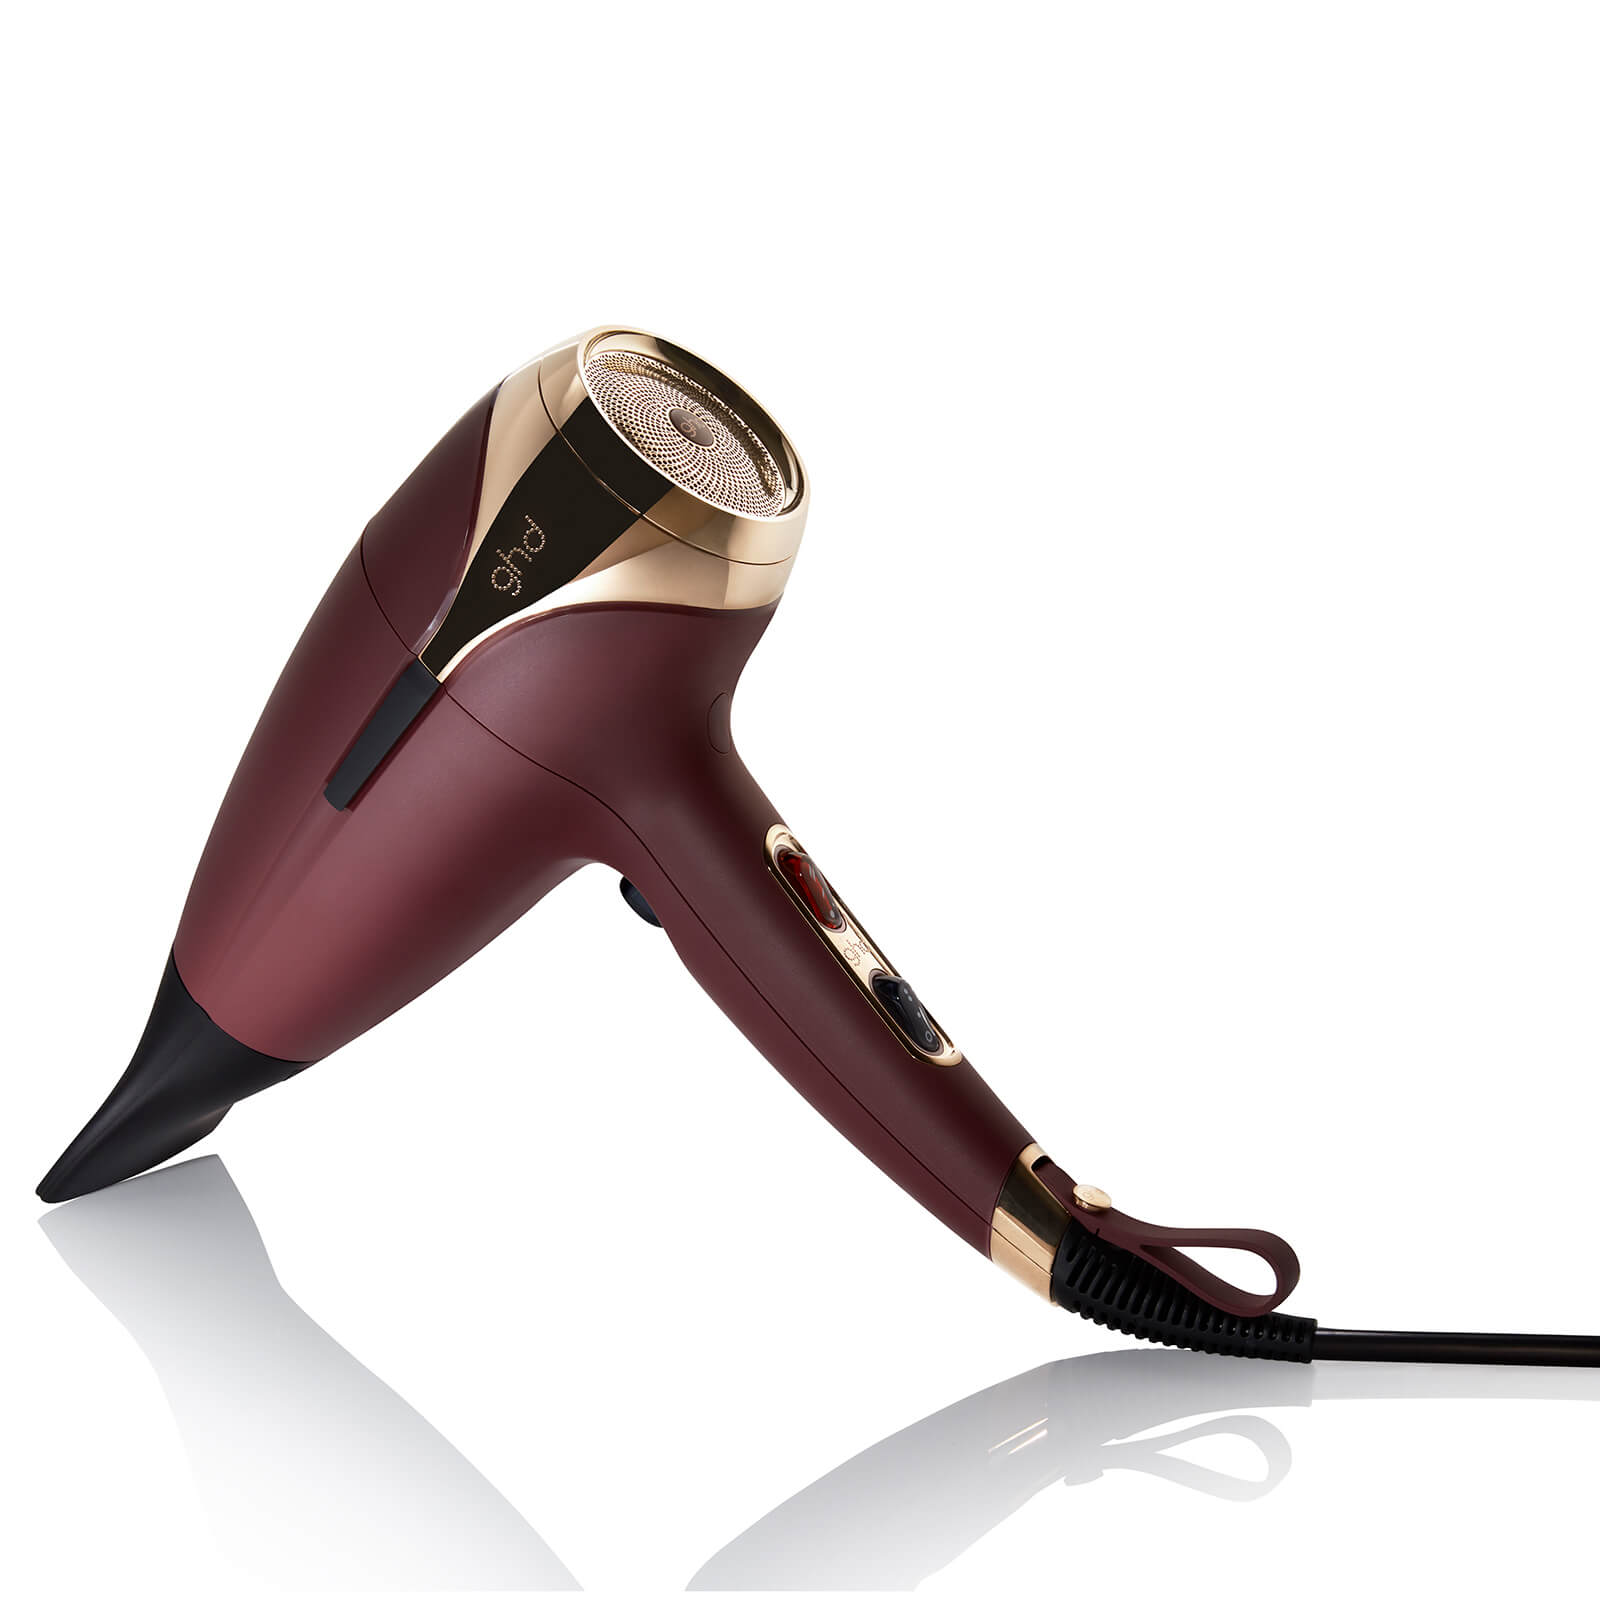 Ghd Helios™ Professional Hair Dryer - Plum with 2 Pin Plug